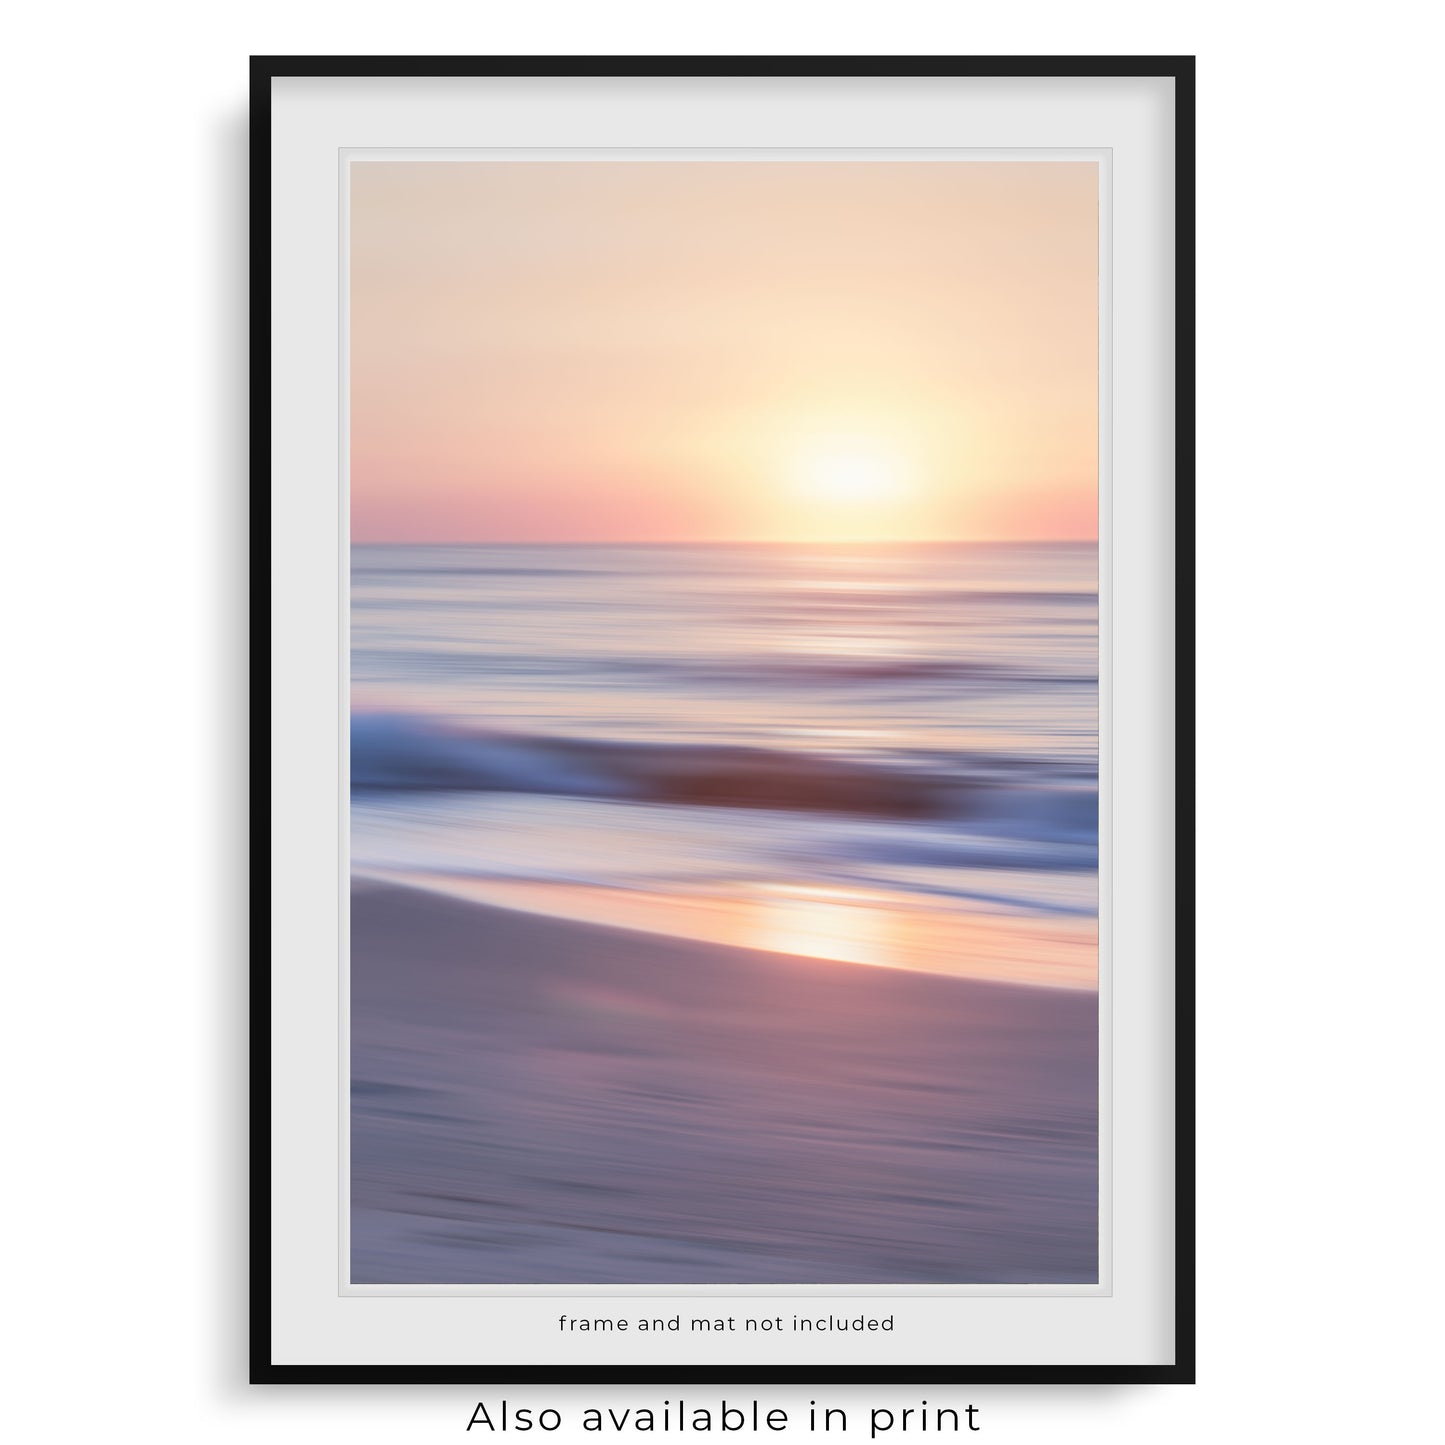 The Outer Banks-inspired photograph is beautifully presented as a framed print, signifying that this photograph is also available as a paper print. Please note that the frame and mat shown are for display purposes only and are not included in the purchase.